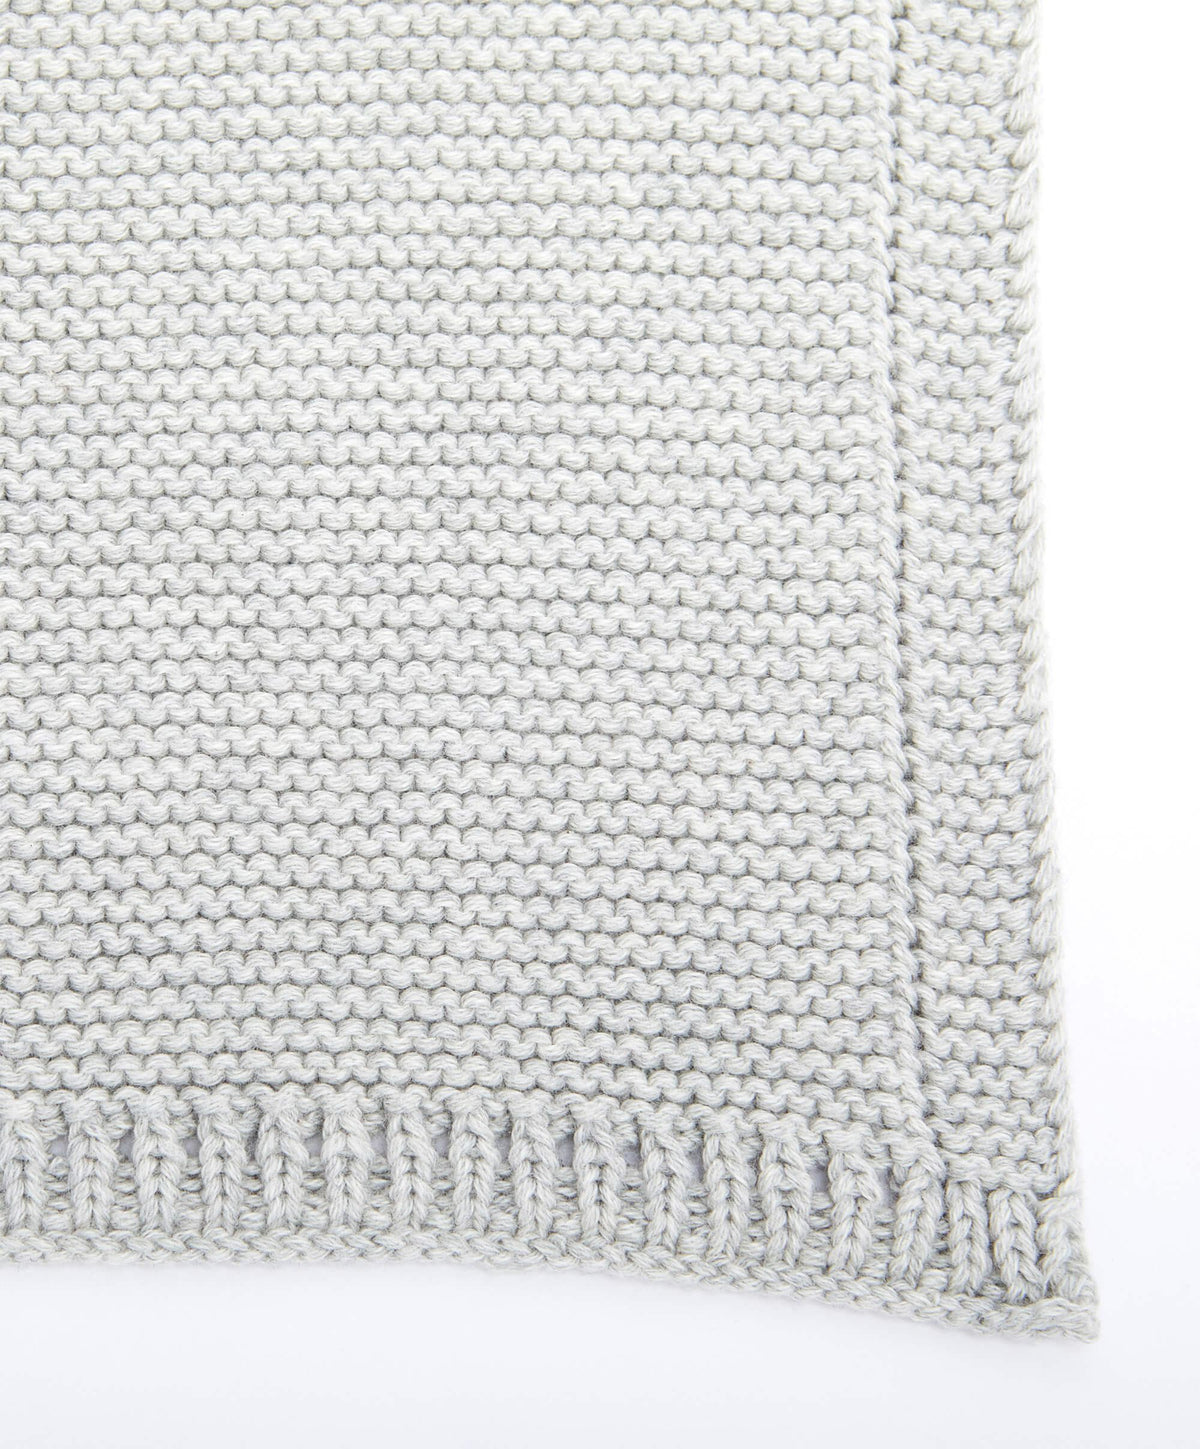 The Little Green Sheep Organic Knitted Cellular Baby Blanket in 